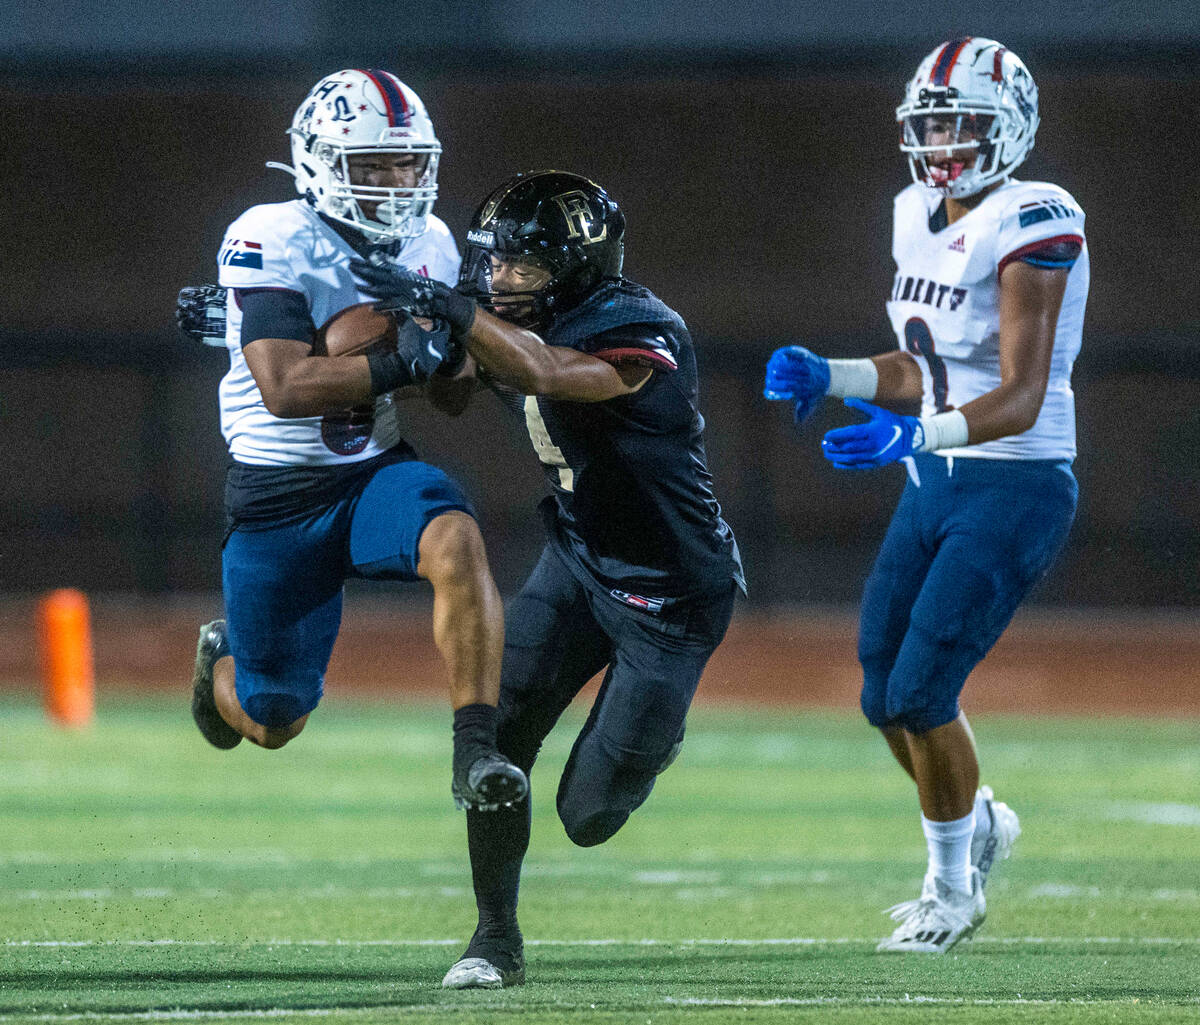 Liberty running back Isaiah Lauofo (3) leaps through a tackle attempt by Faith Lutheran's lineb ...